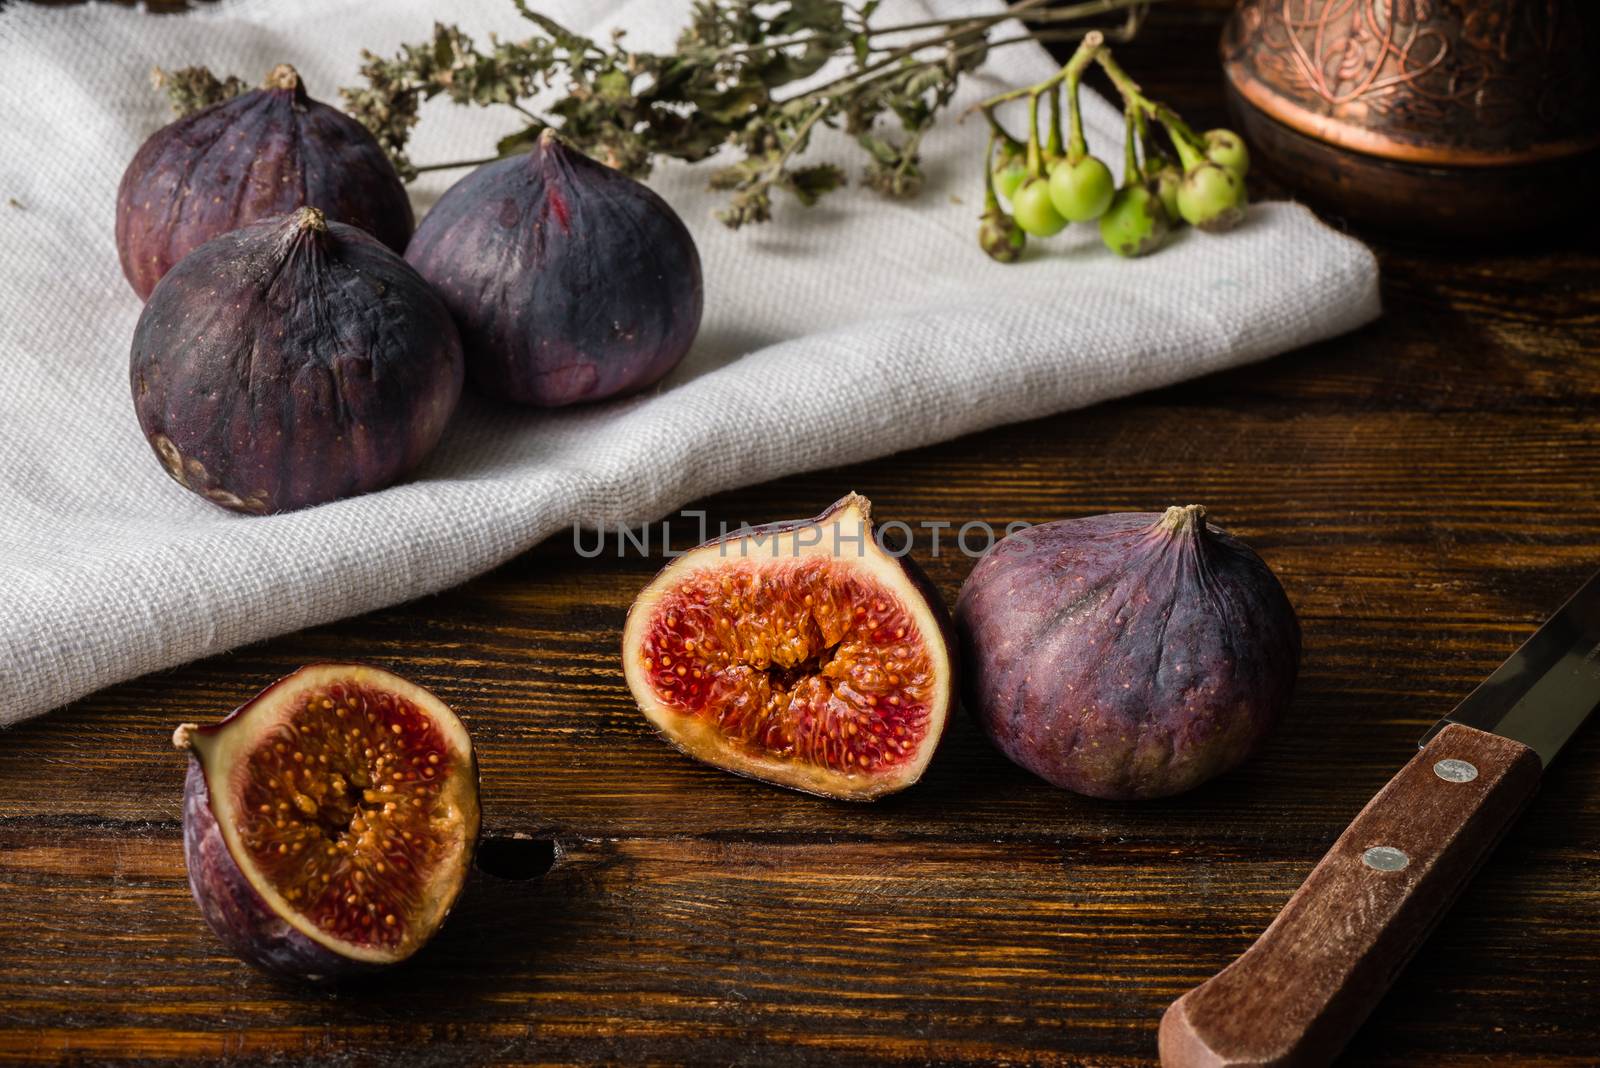 Ripe figs on cloth with sliced one and some objects by Seva_blsv